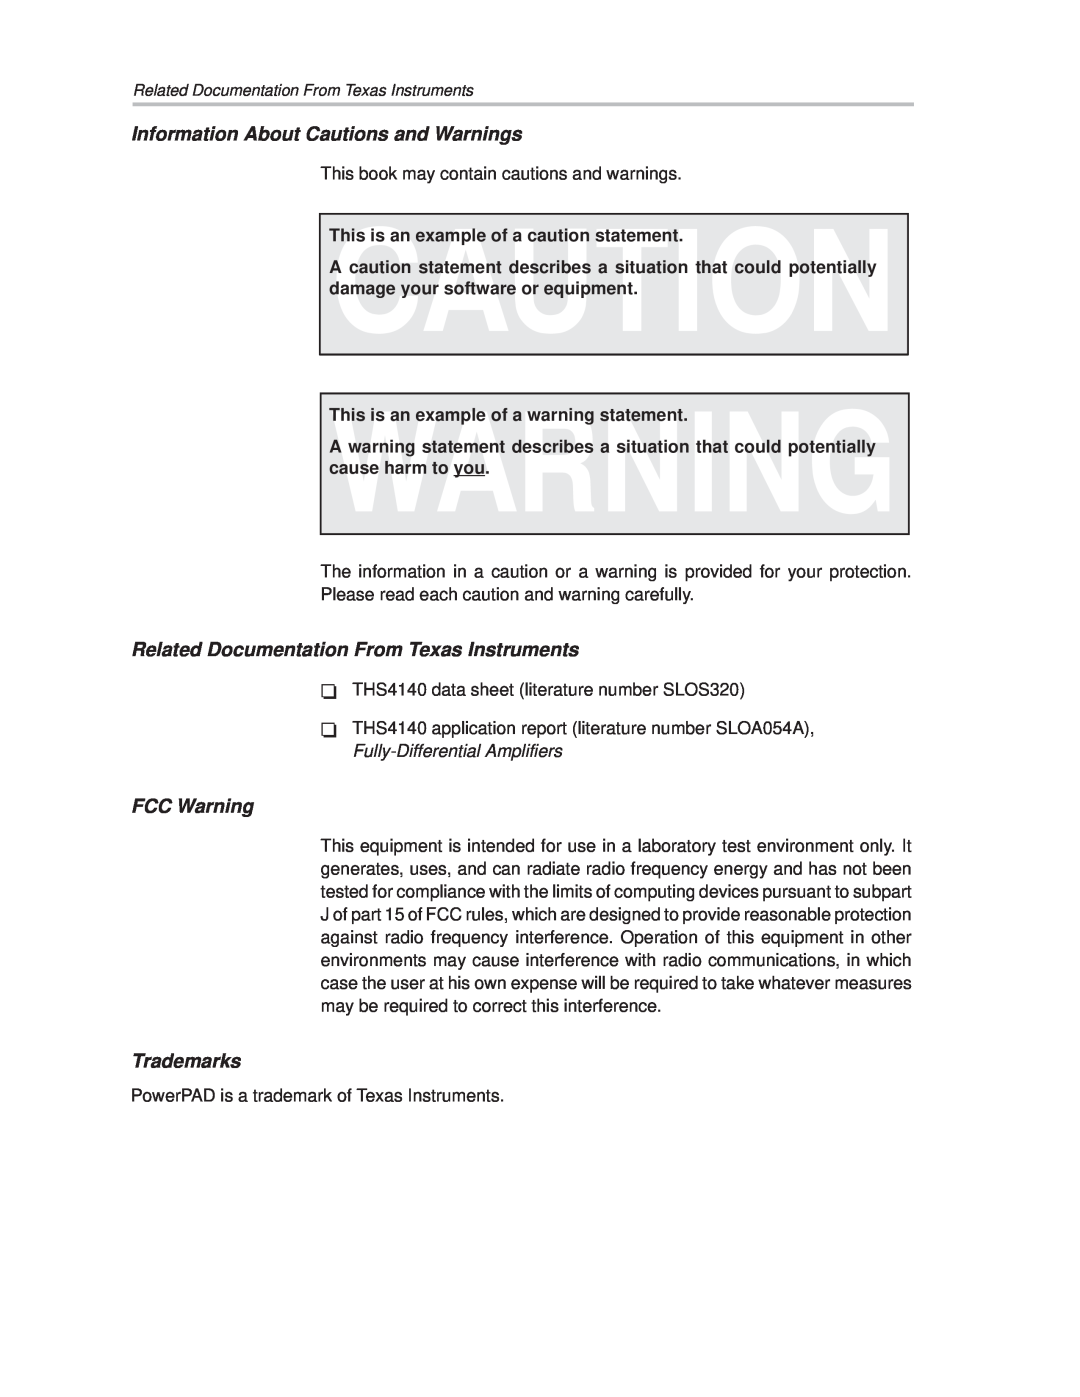 Texas Instruments SLOU106 manual Information About Cautions and Warnings, Related Documentation From Texas Instruments 